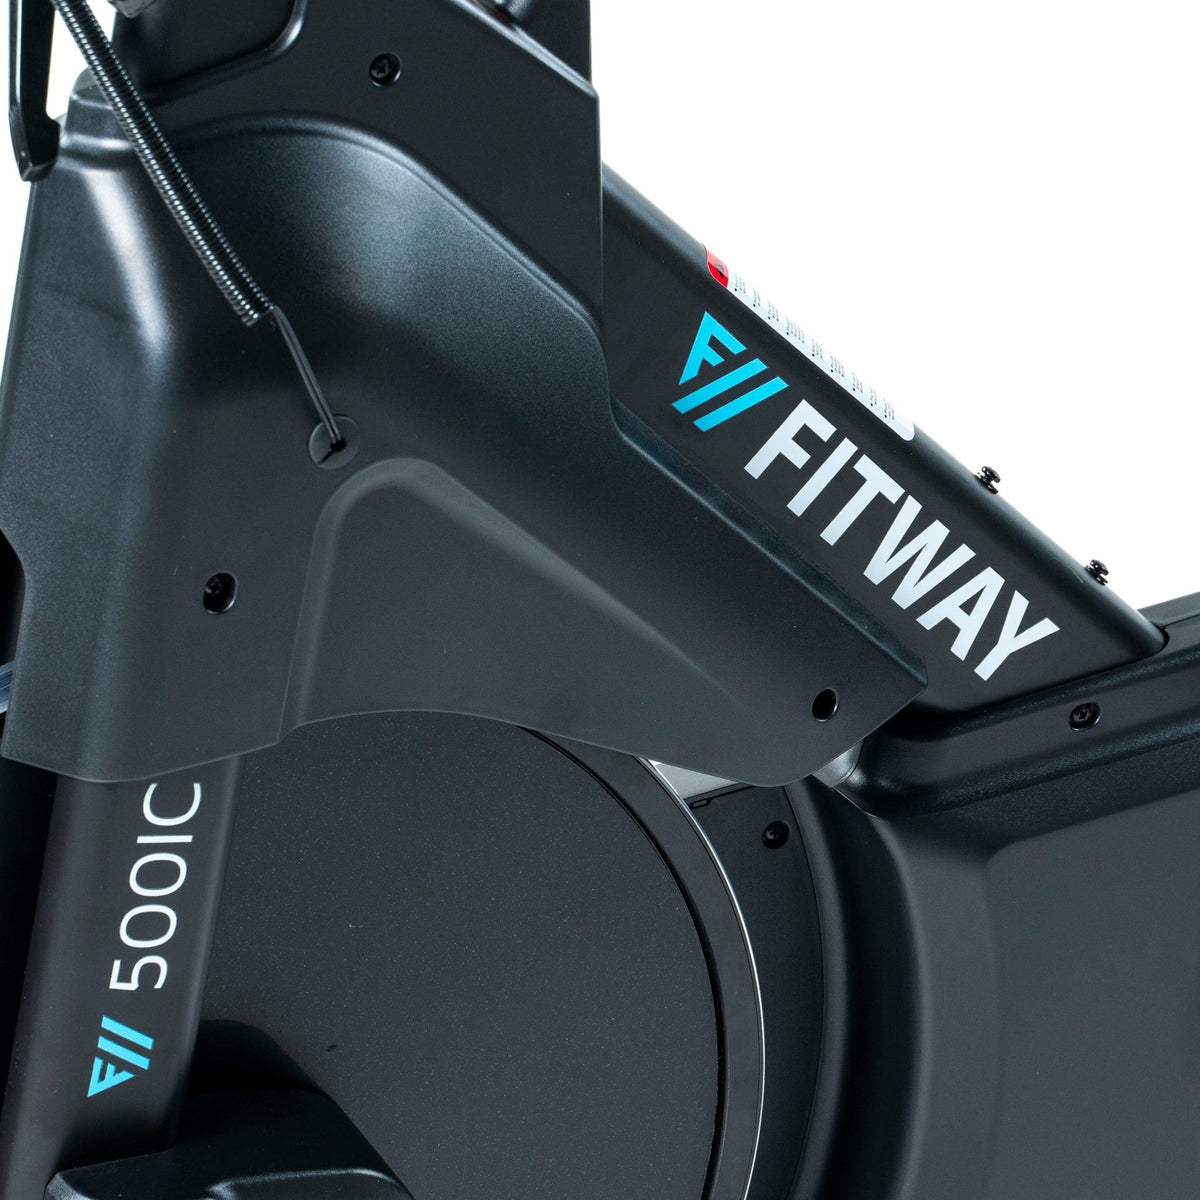 FitWay Equip. 500IC Indoor Cycle - Fitness Experience